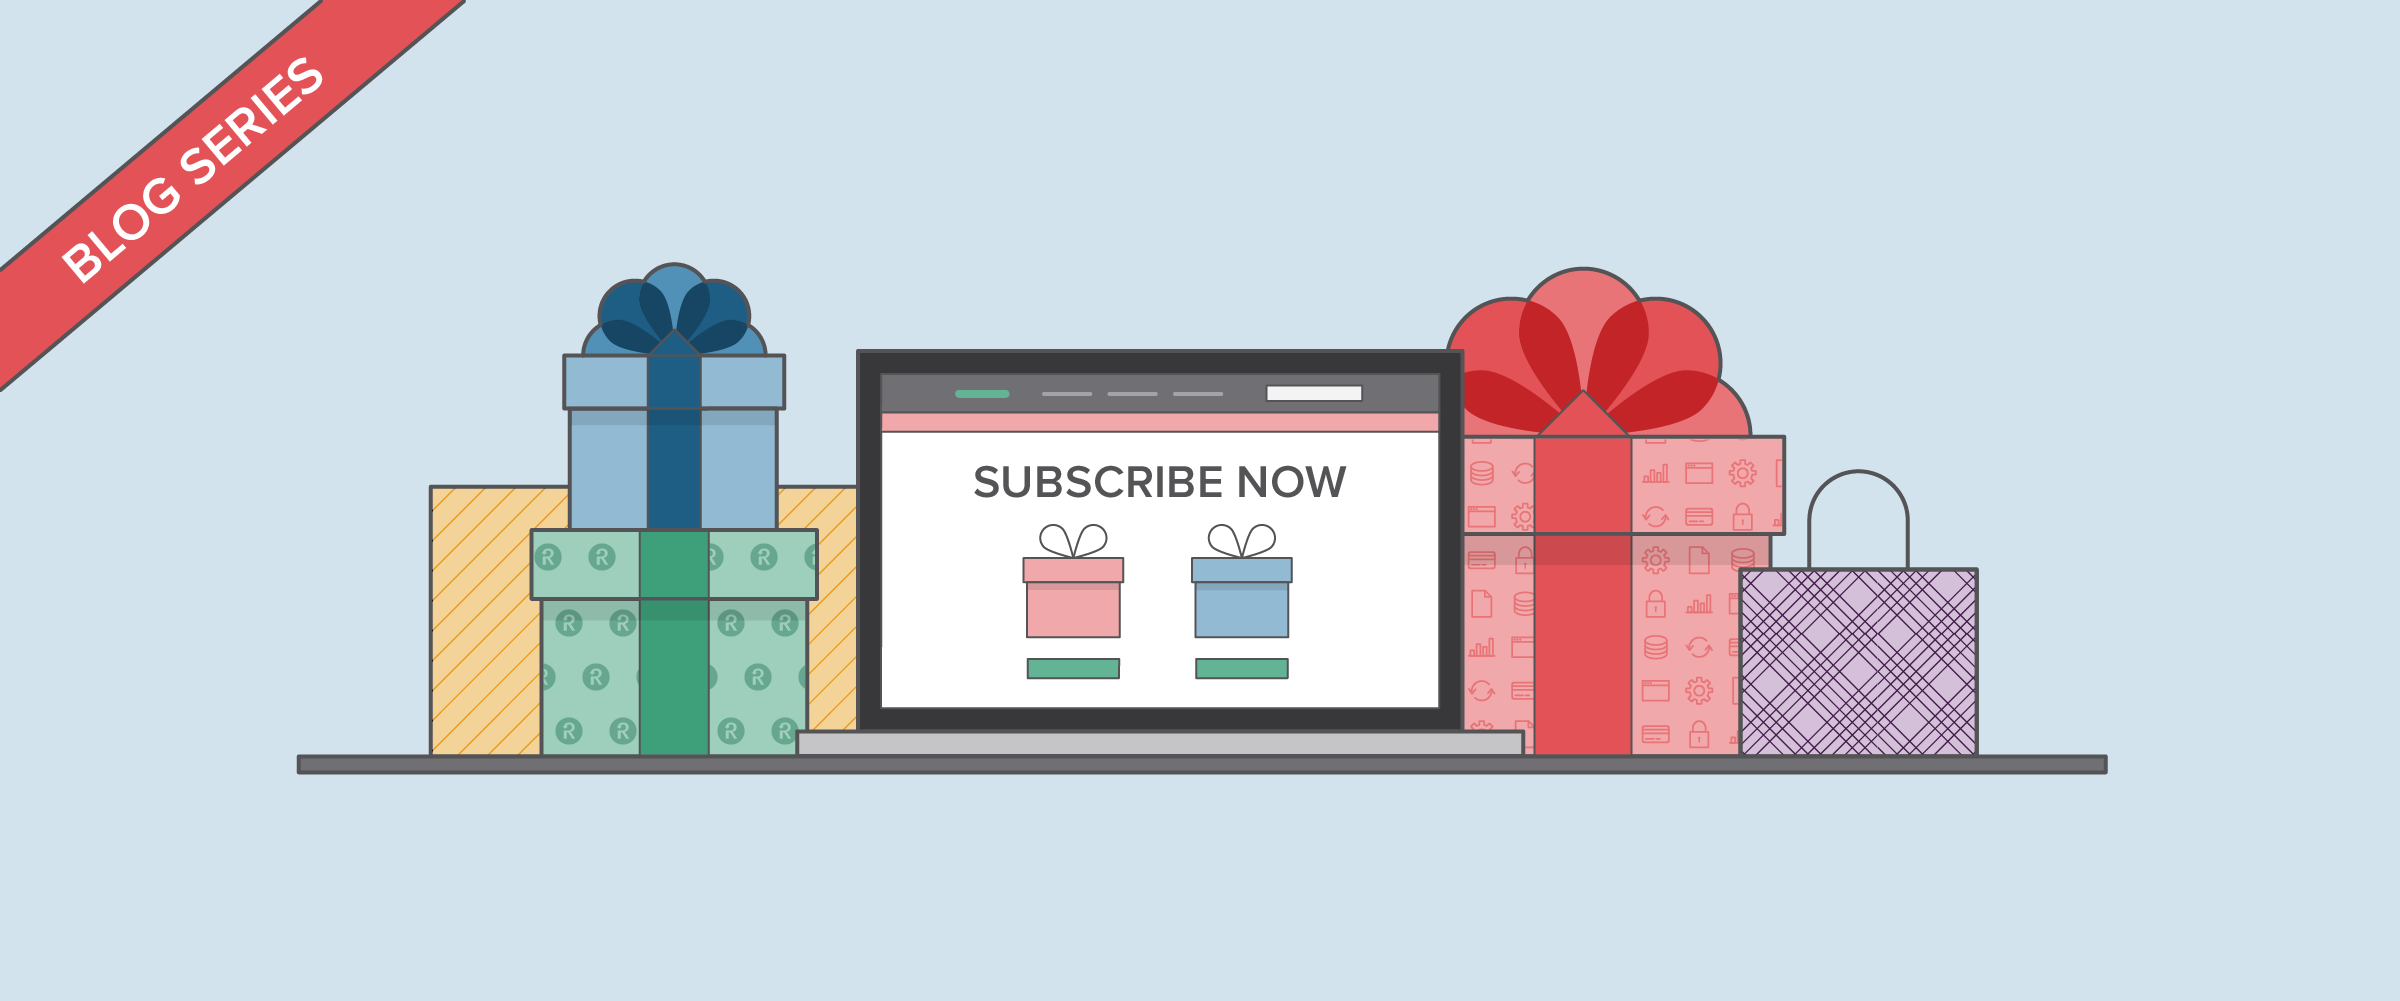 Subscribe now banner showing gifts